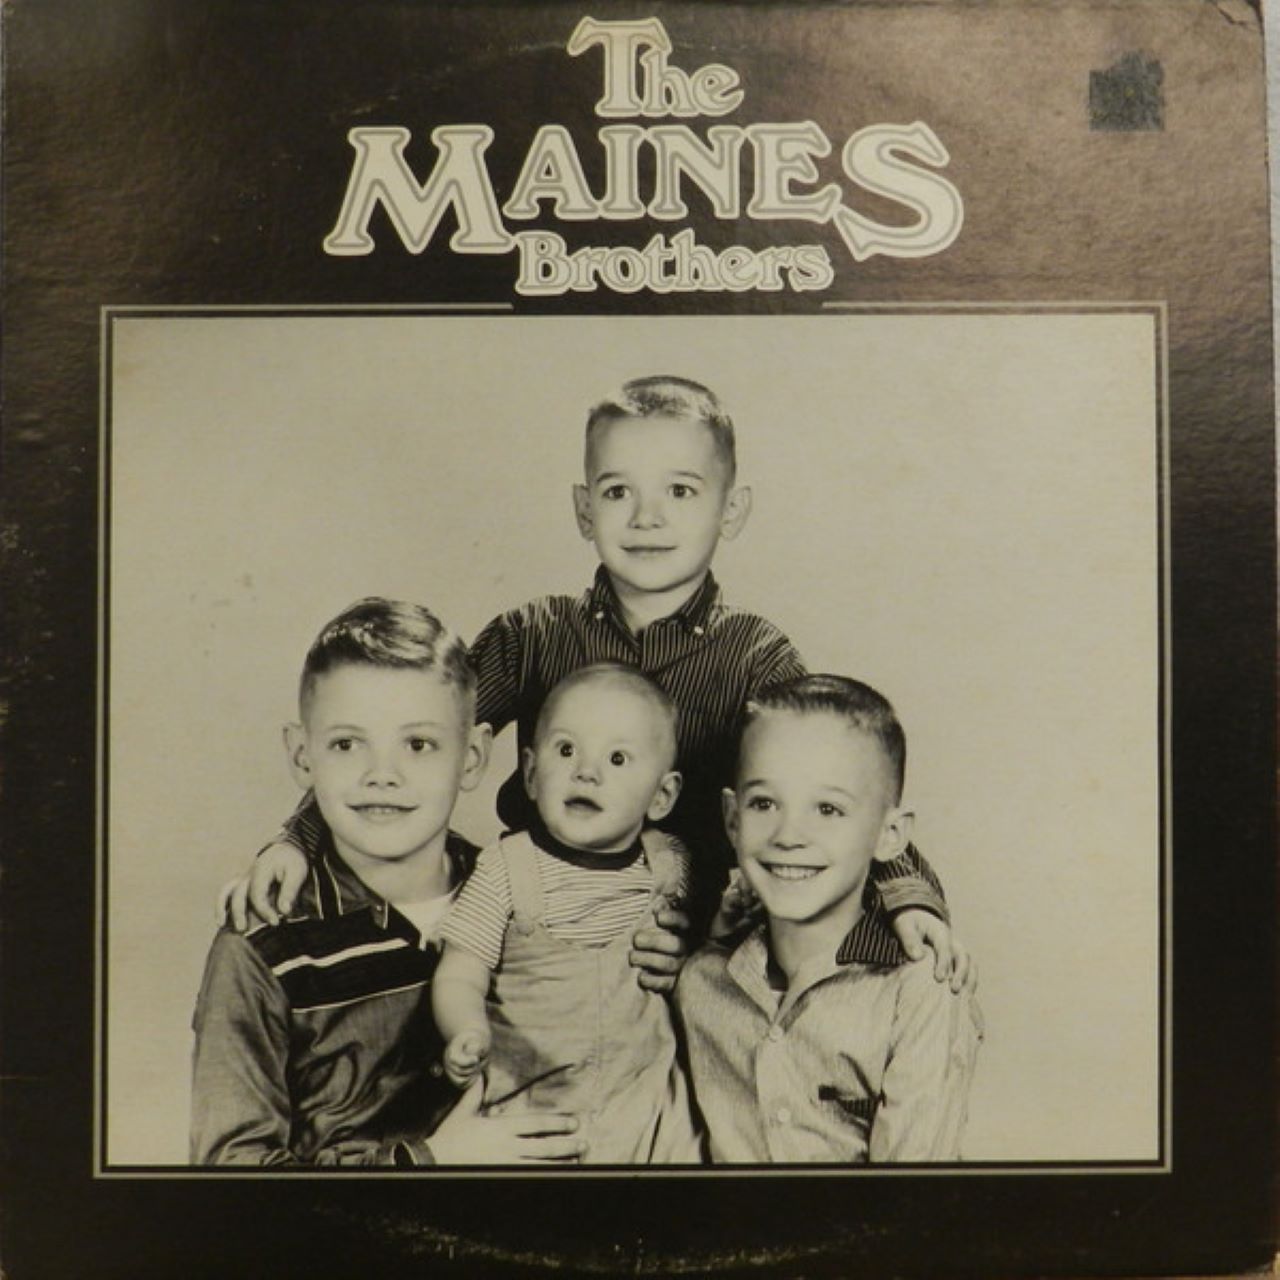 Maines Brothers - Maines Brothers cover album